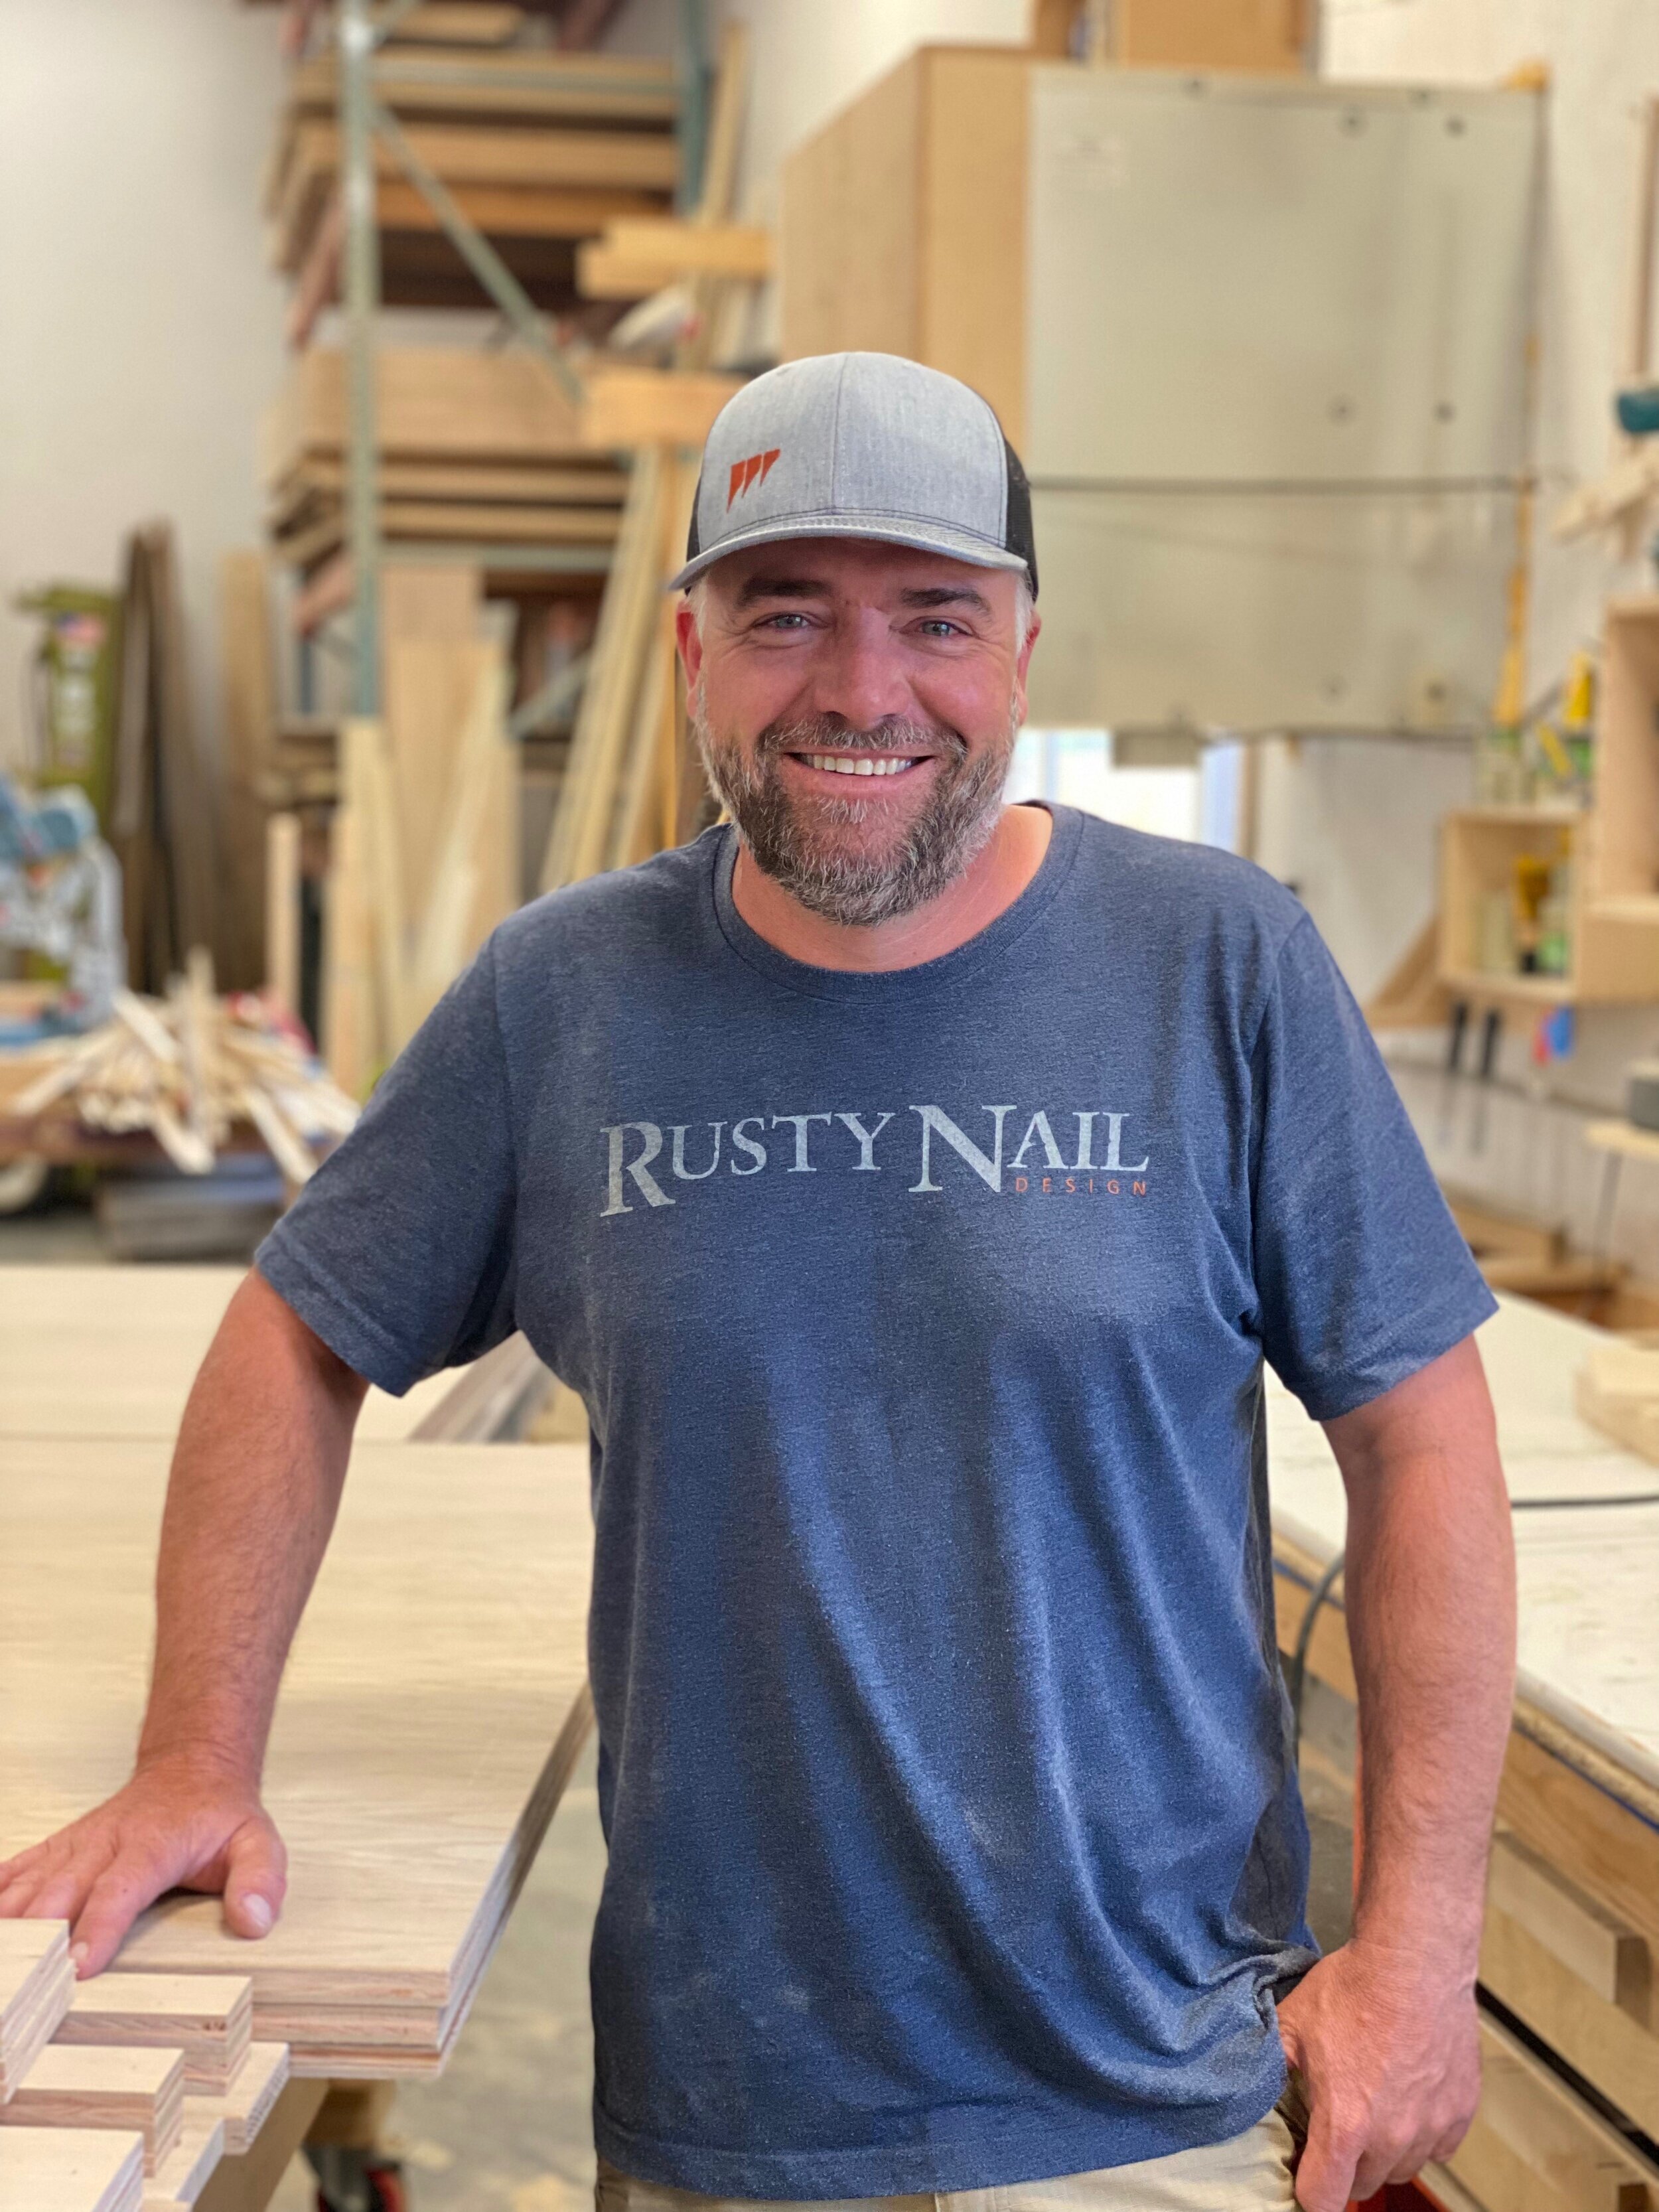 About - The Rusty Nail - Bar & Grill in Wichita, KS